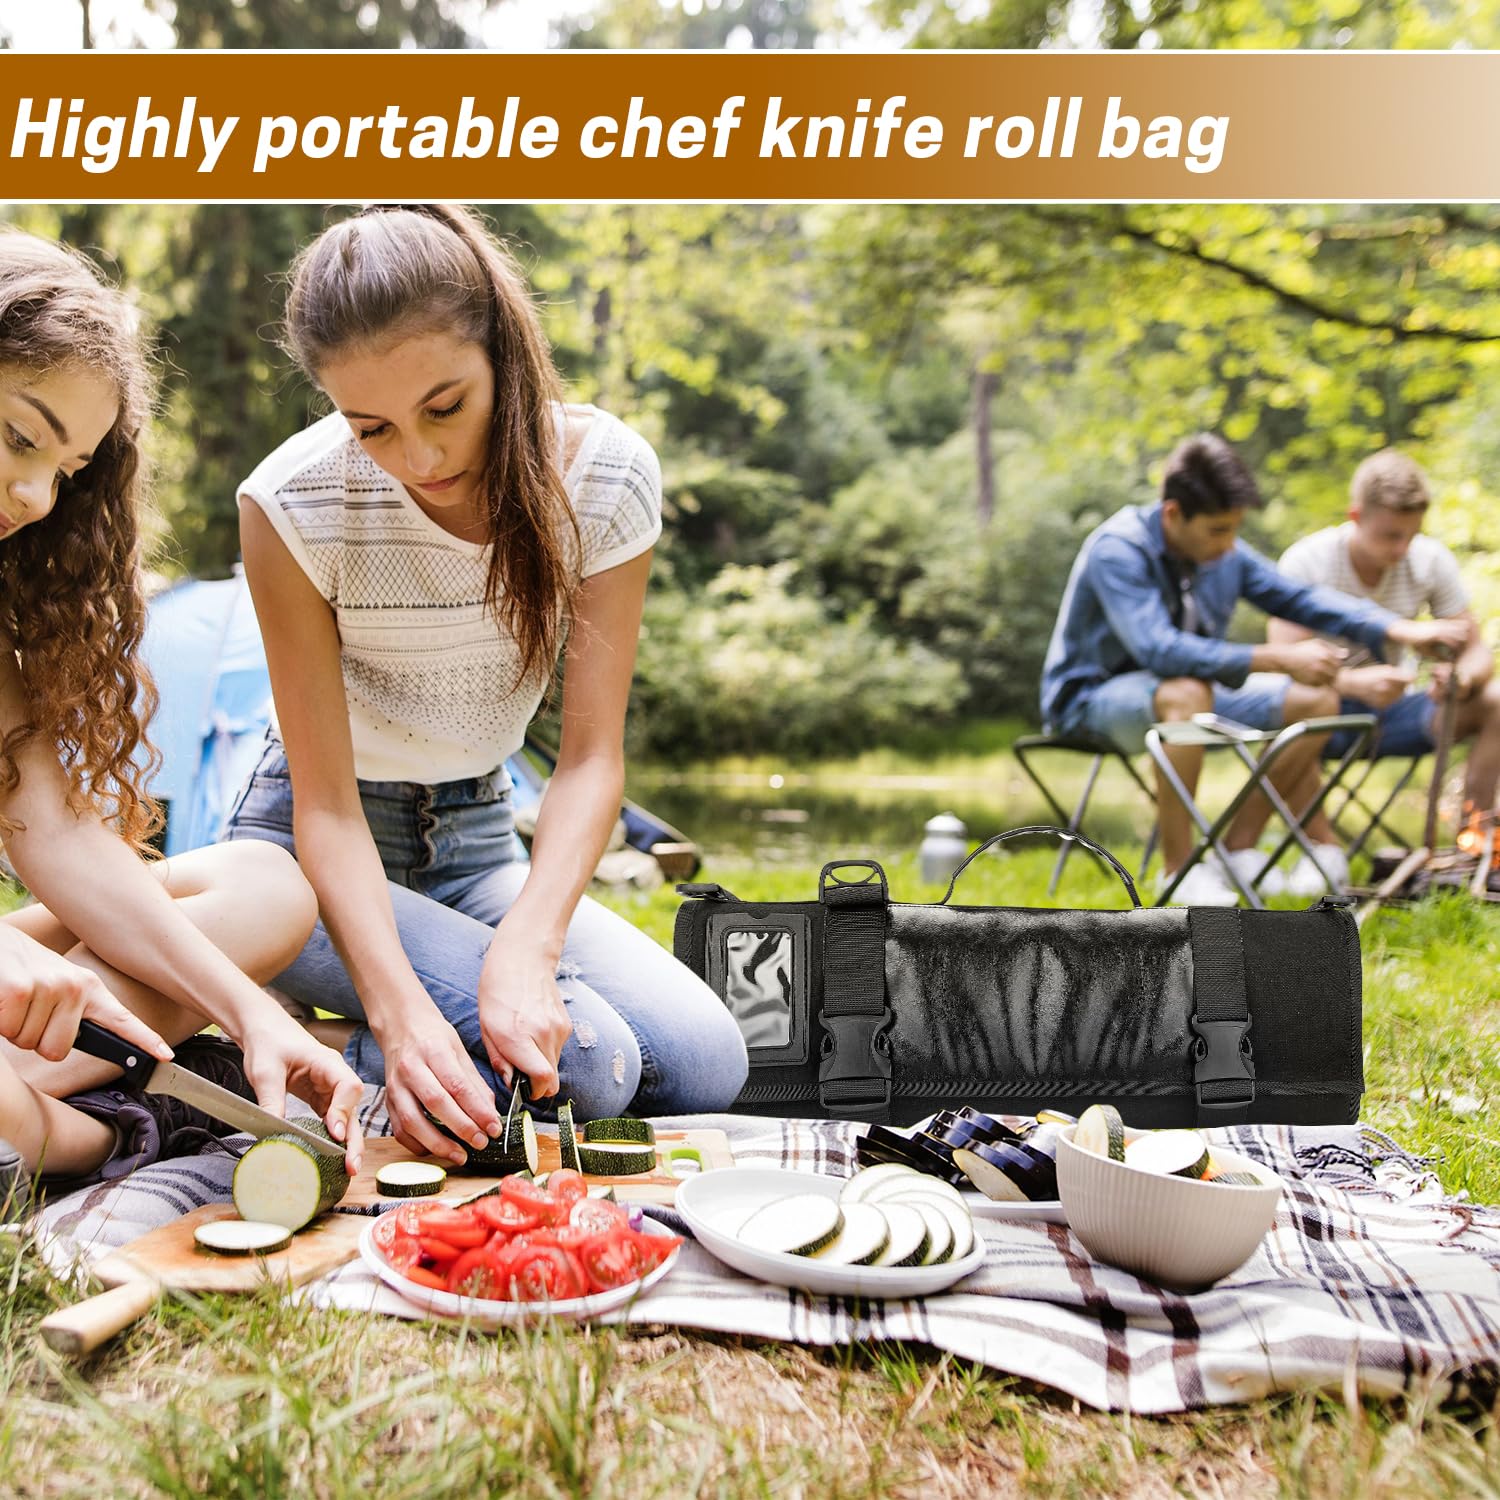 SWISSELITE Chef Knife Roll Bag, Heavy Duty Canvas & Leather Chef Knife Bag, 10 Slots for Knives with Detachable Storage Bag